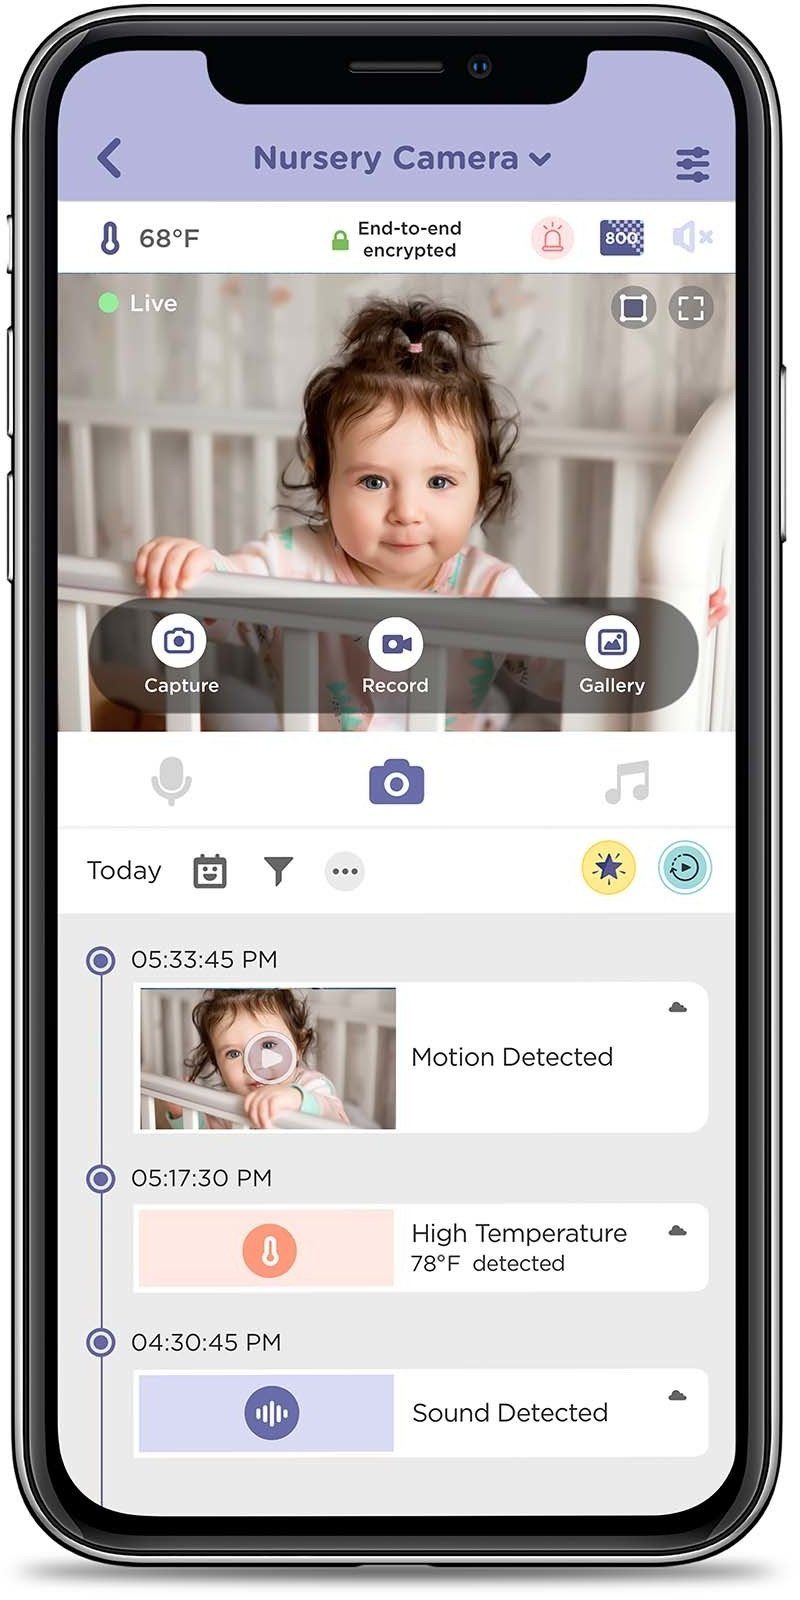 Connect Nursery Video-Babyphone Hubble Connected Pal